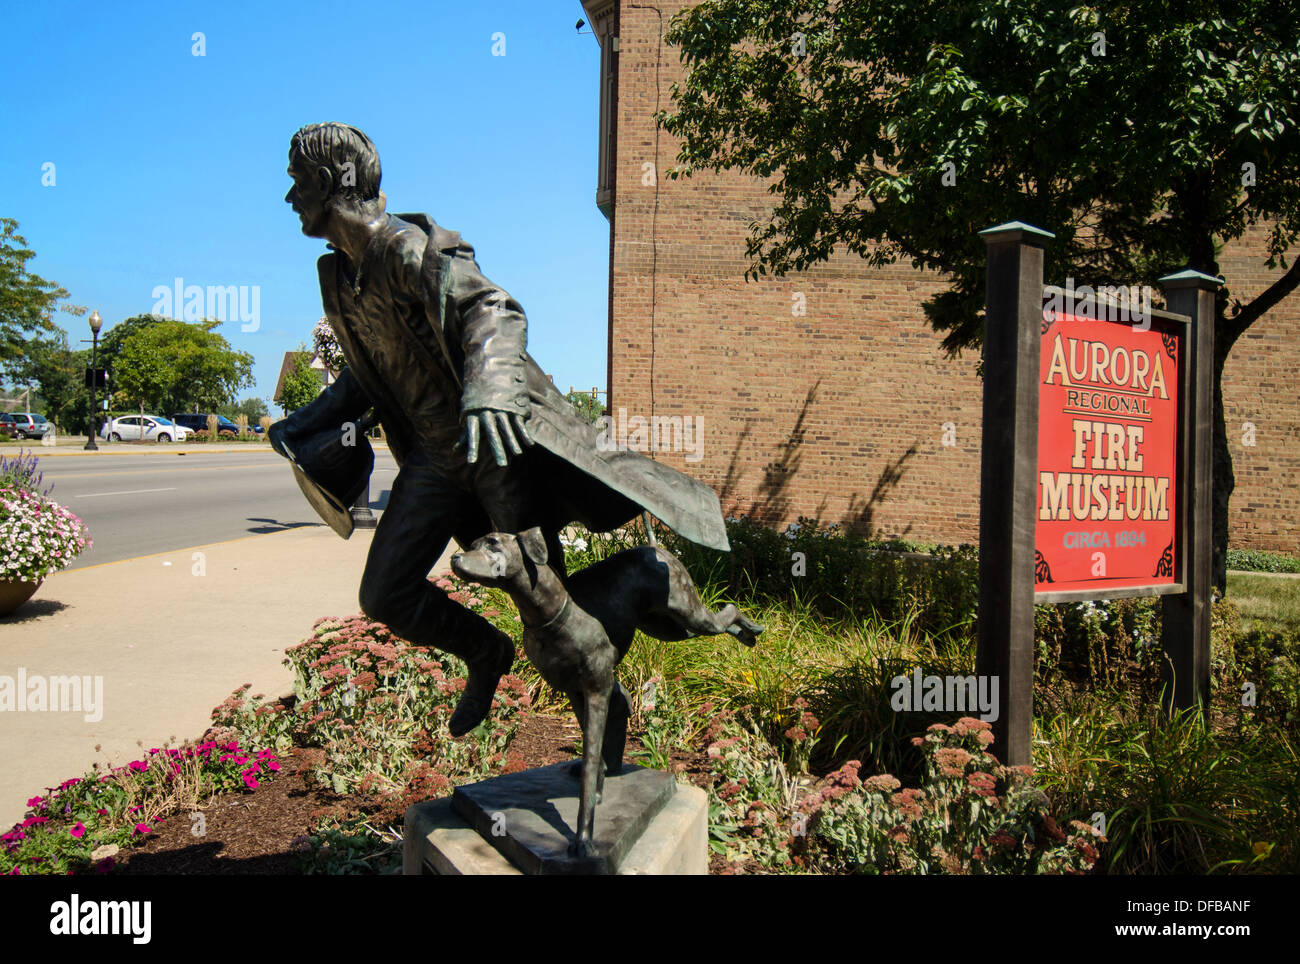 Statue of a firefighter and fire safety dog at the Aurora Regional Fire Museum in Aurora, Illinois Stock Photo